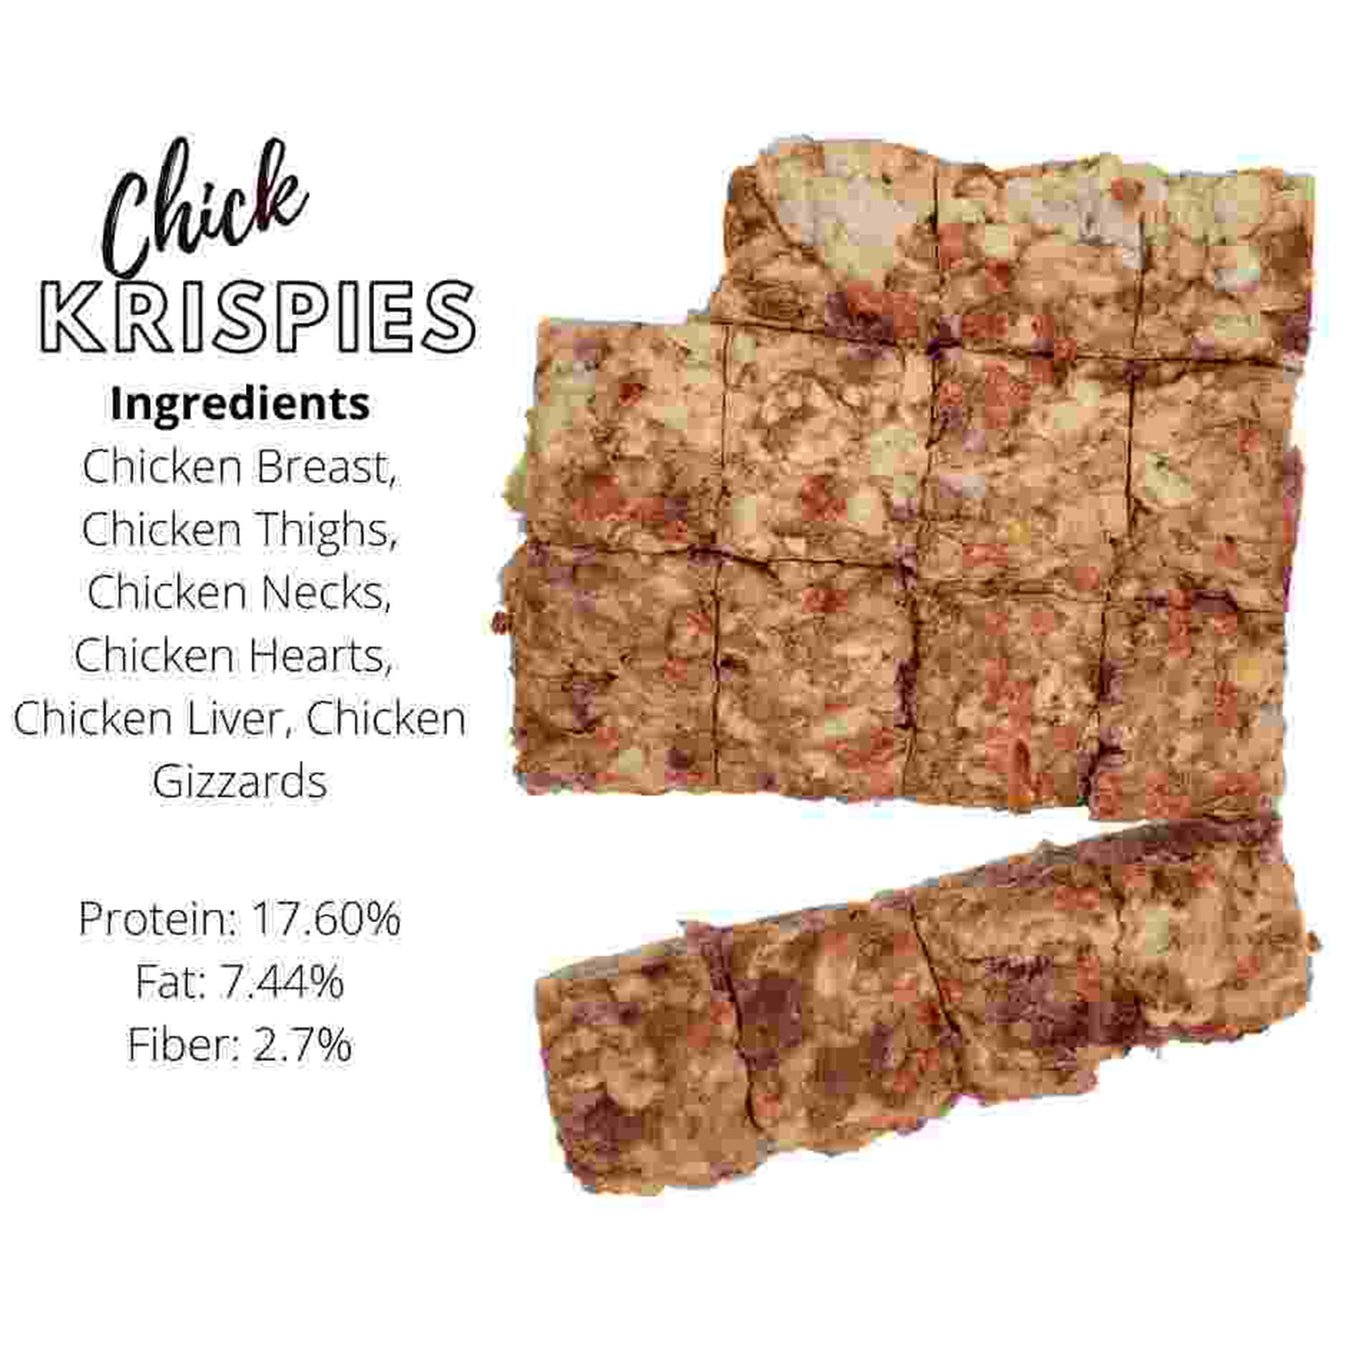 Freeze Dried Chicken Krispies (by ounce)